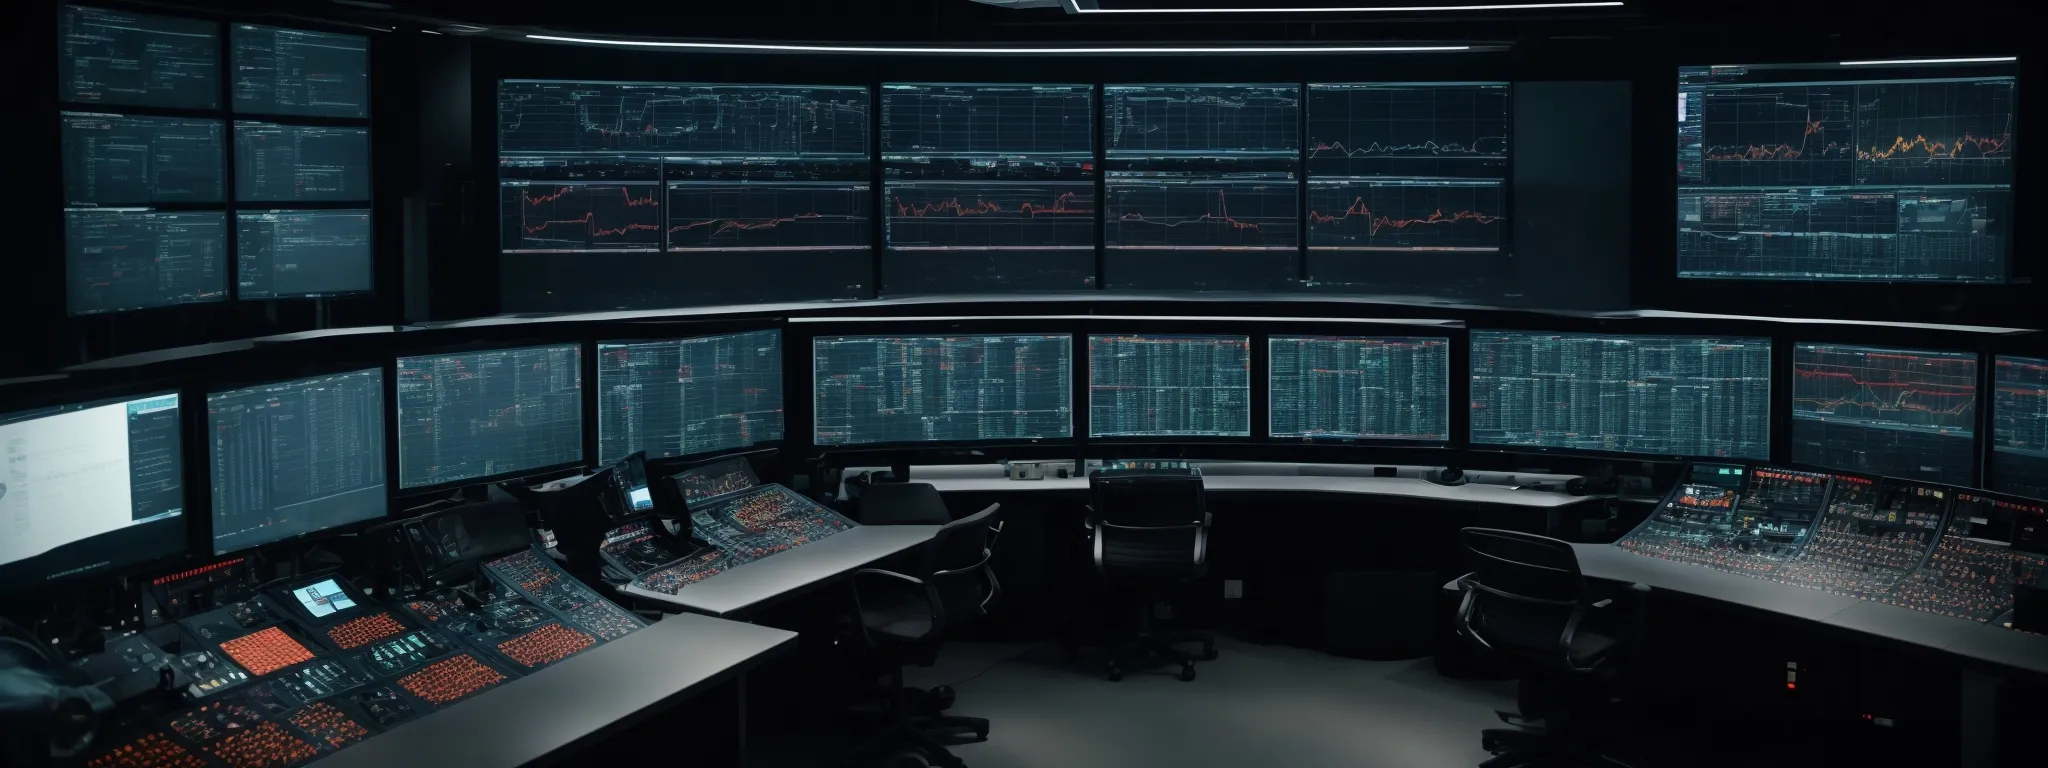 a high-tech control room with multiple screens displaying data analytics and digital interfaces.